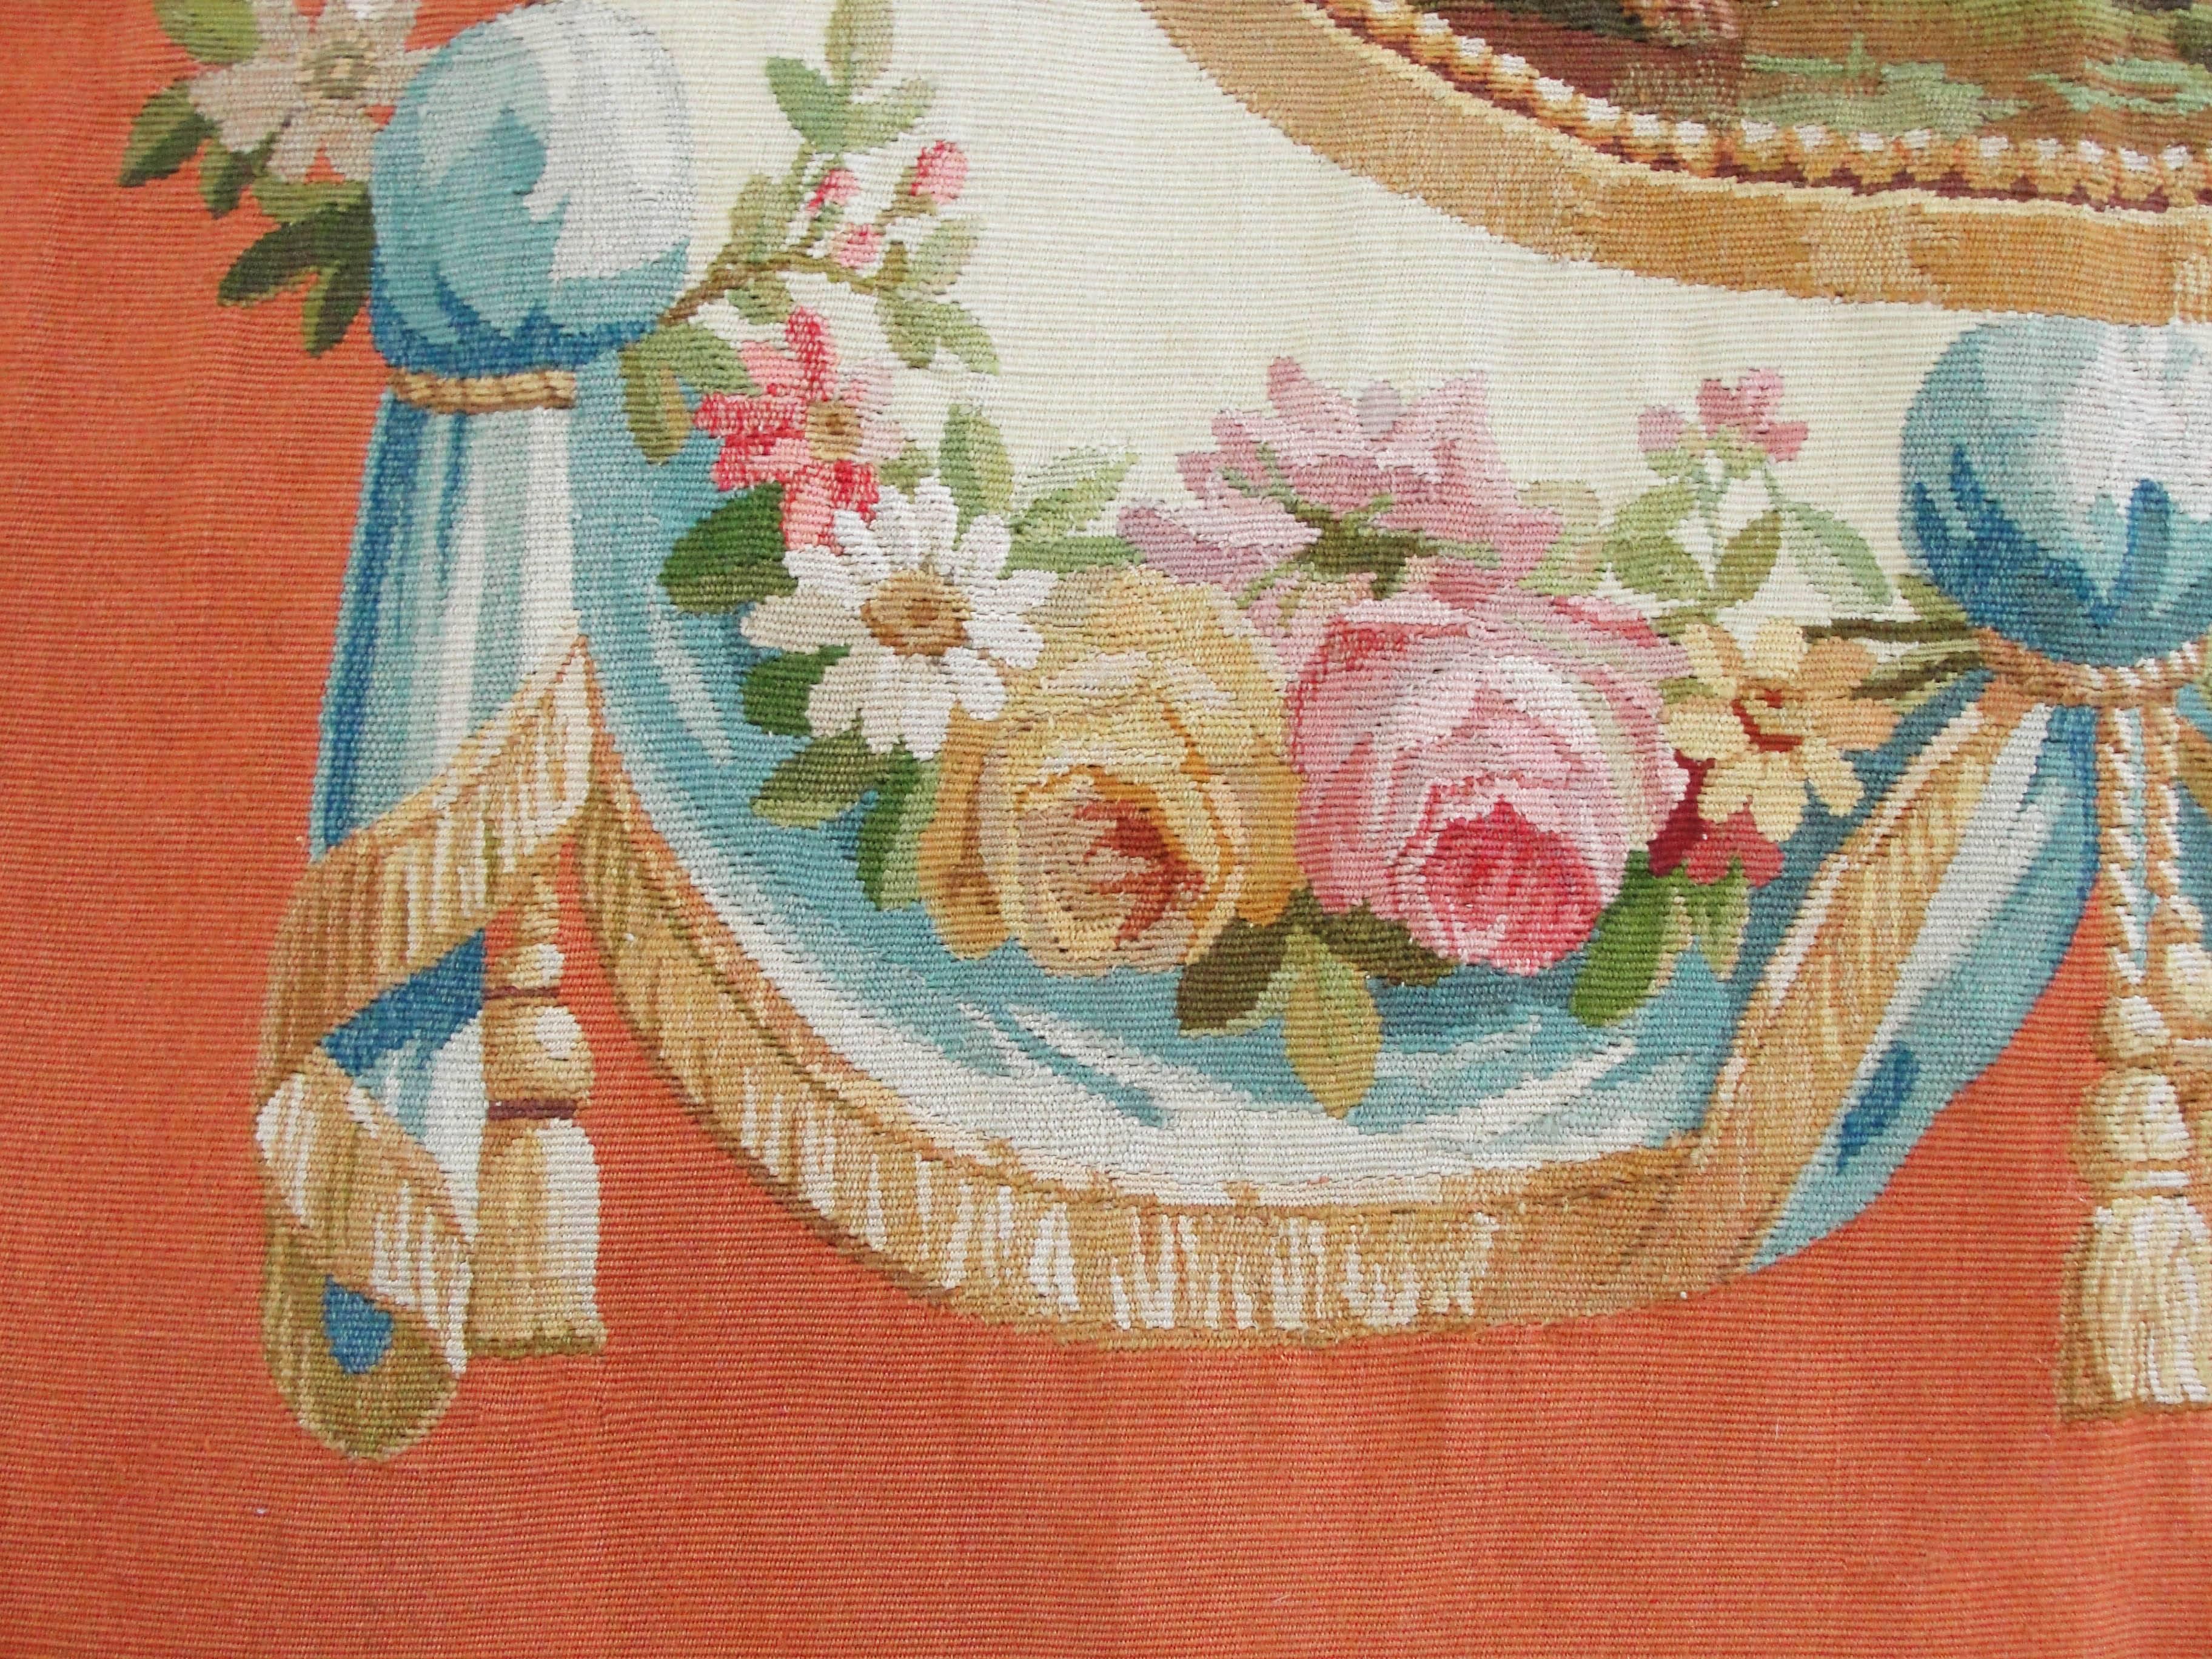 Hand-Woven Antique Aubusson Tapestry, Very Fine For Sale